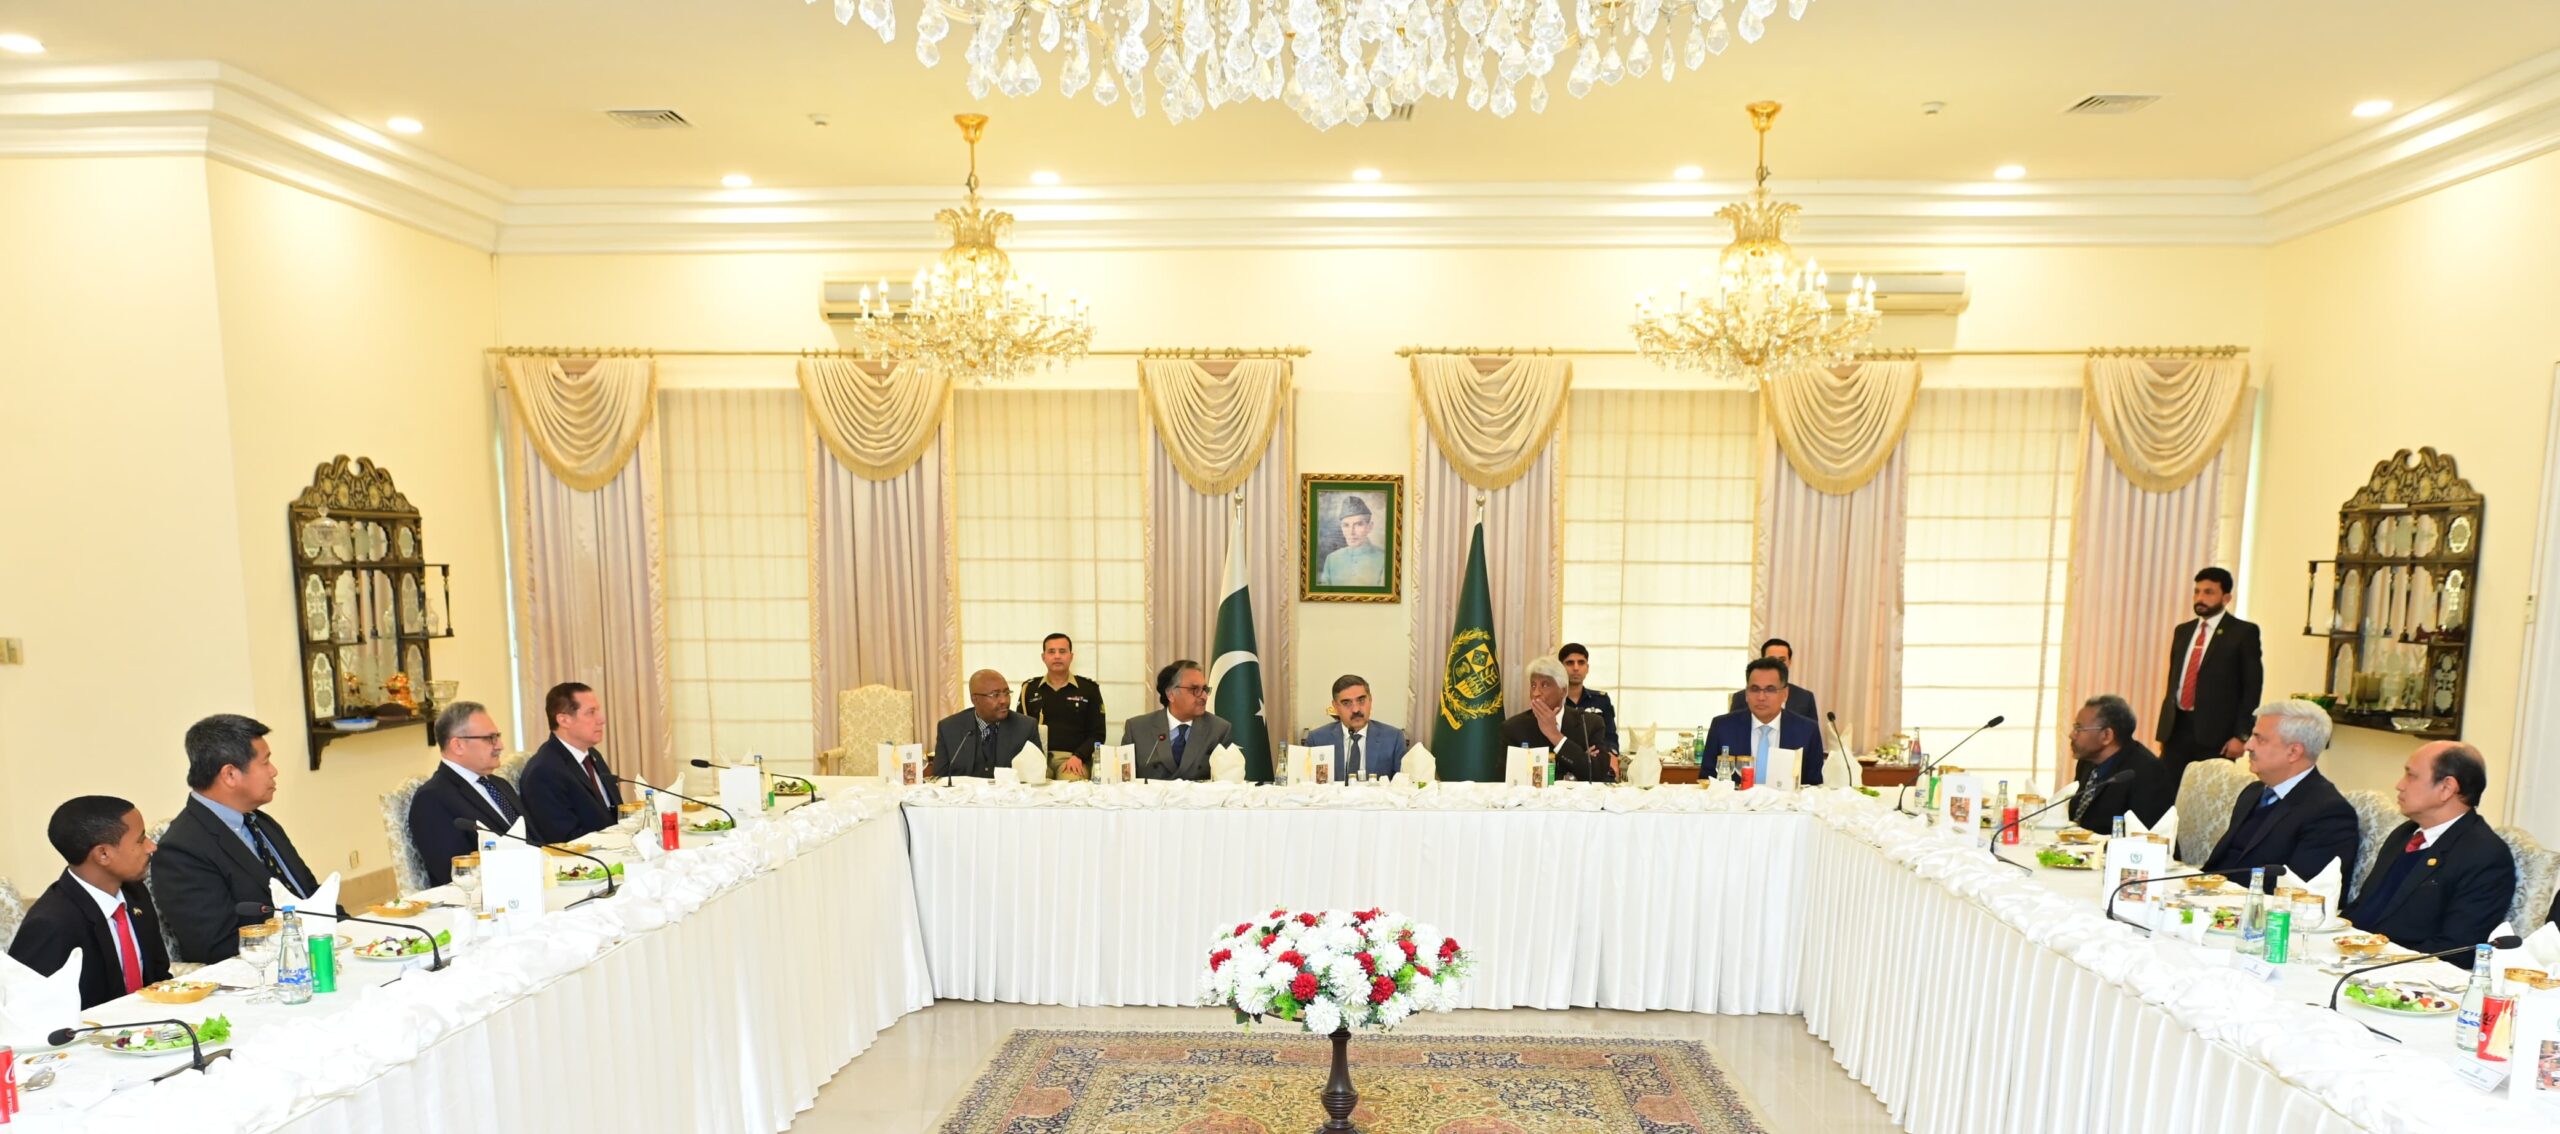 Caretaker Prime Minister meets a group of envoys from African and Asian countries.